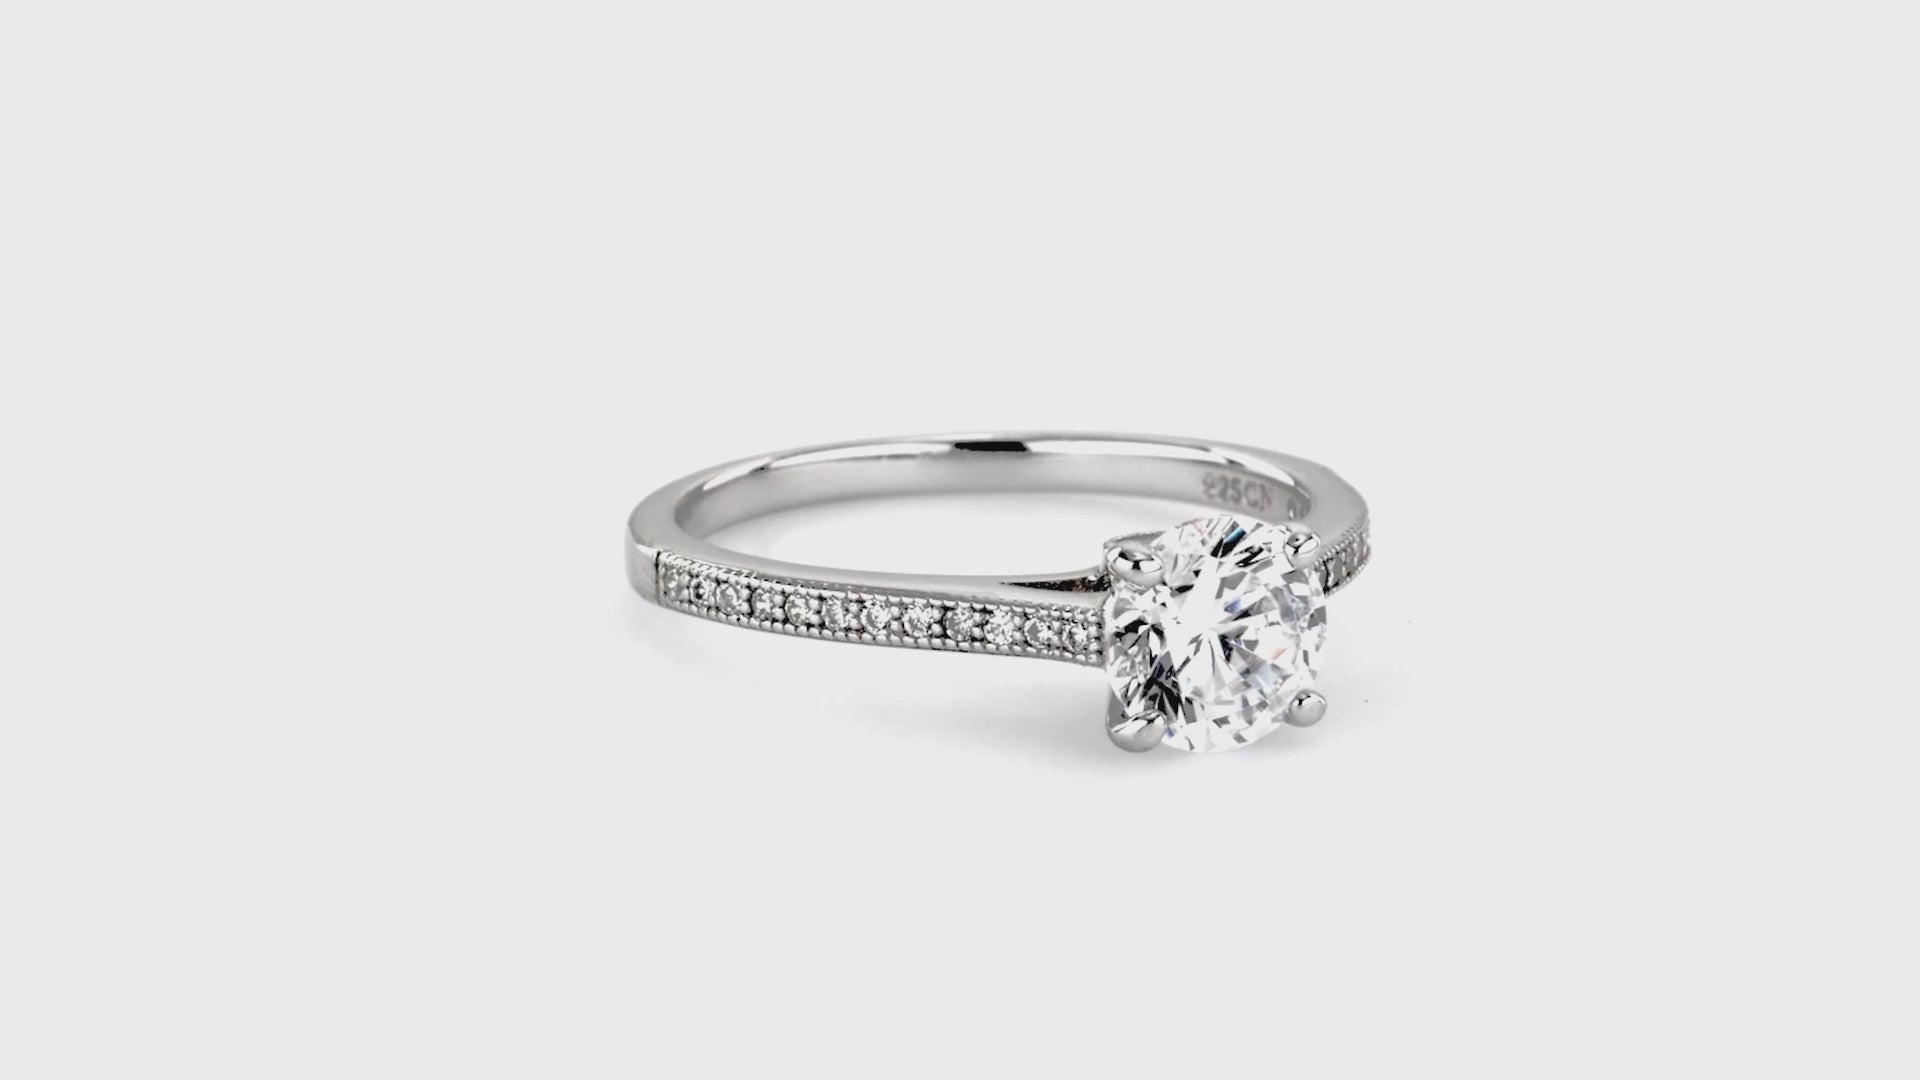 Video Contains Solitaire 1ct Round CZ Ring Set in Sterling Silver. Style Number VR333-02